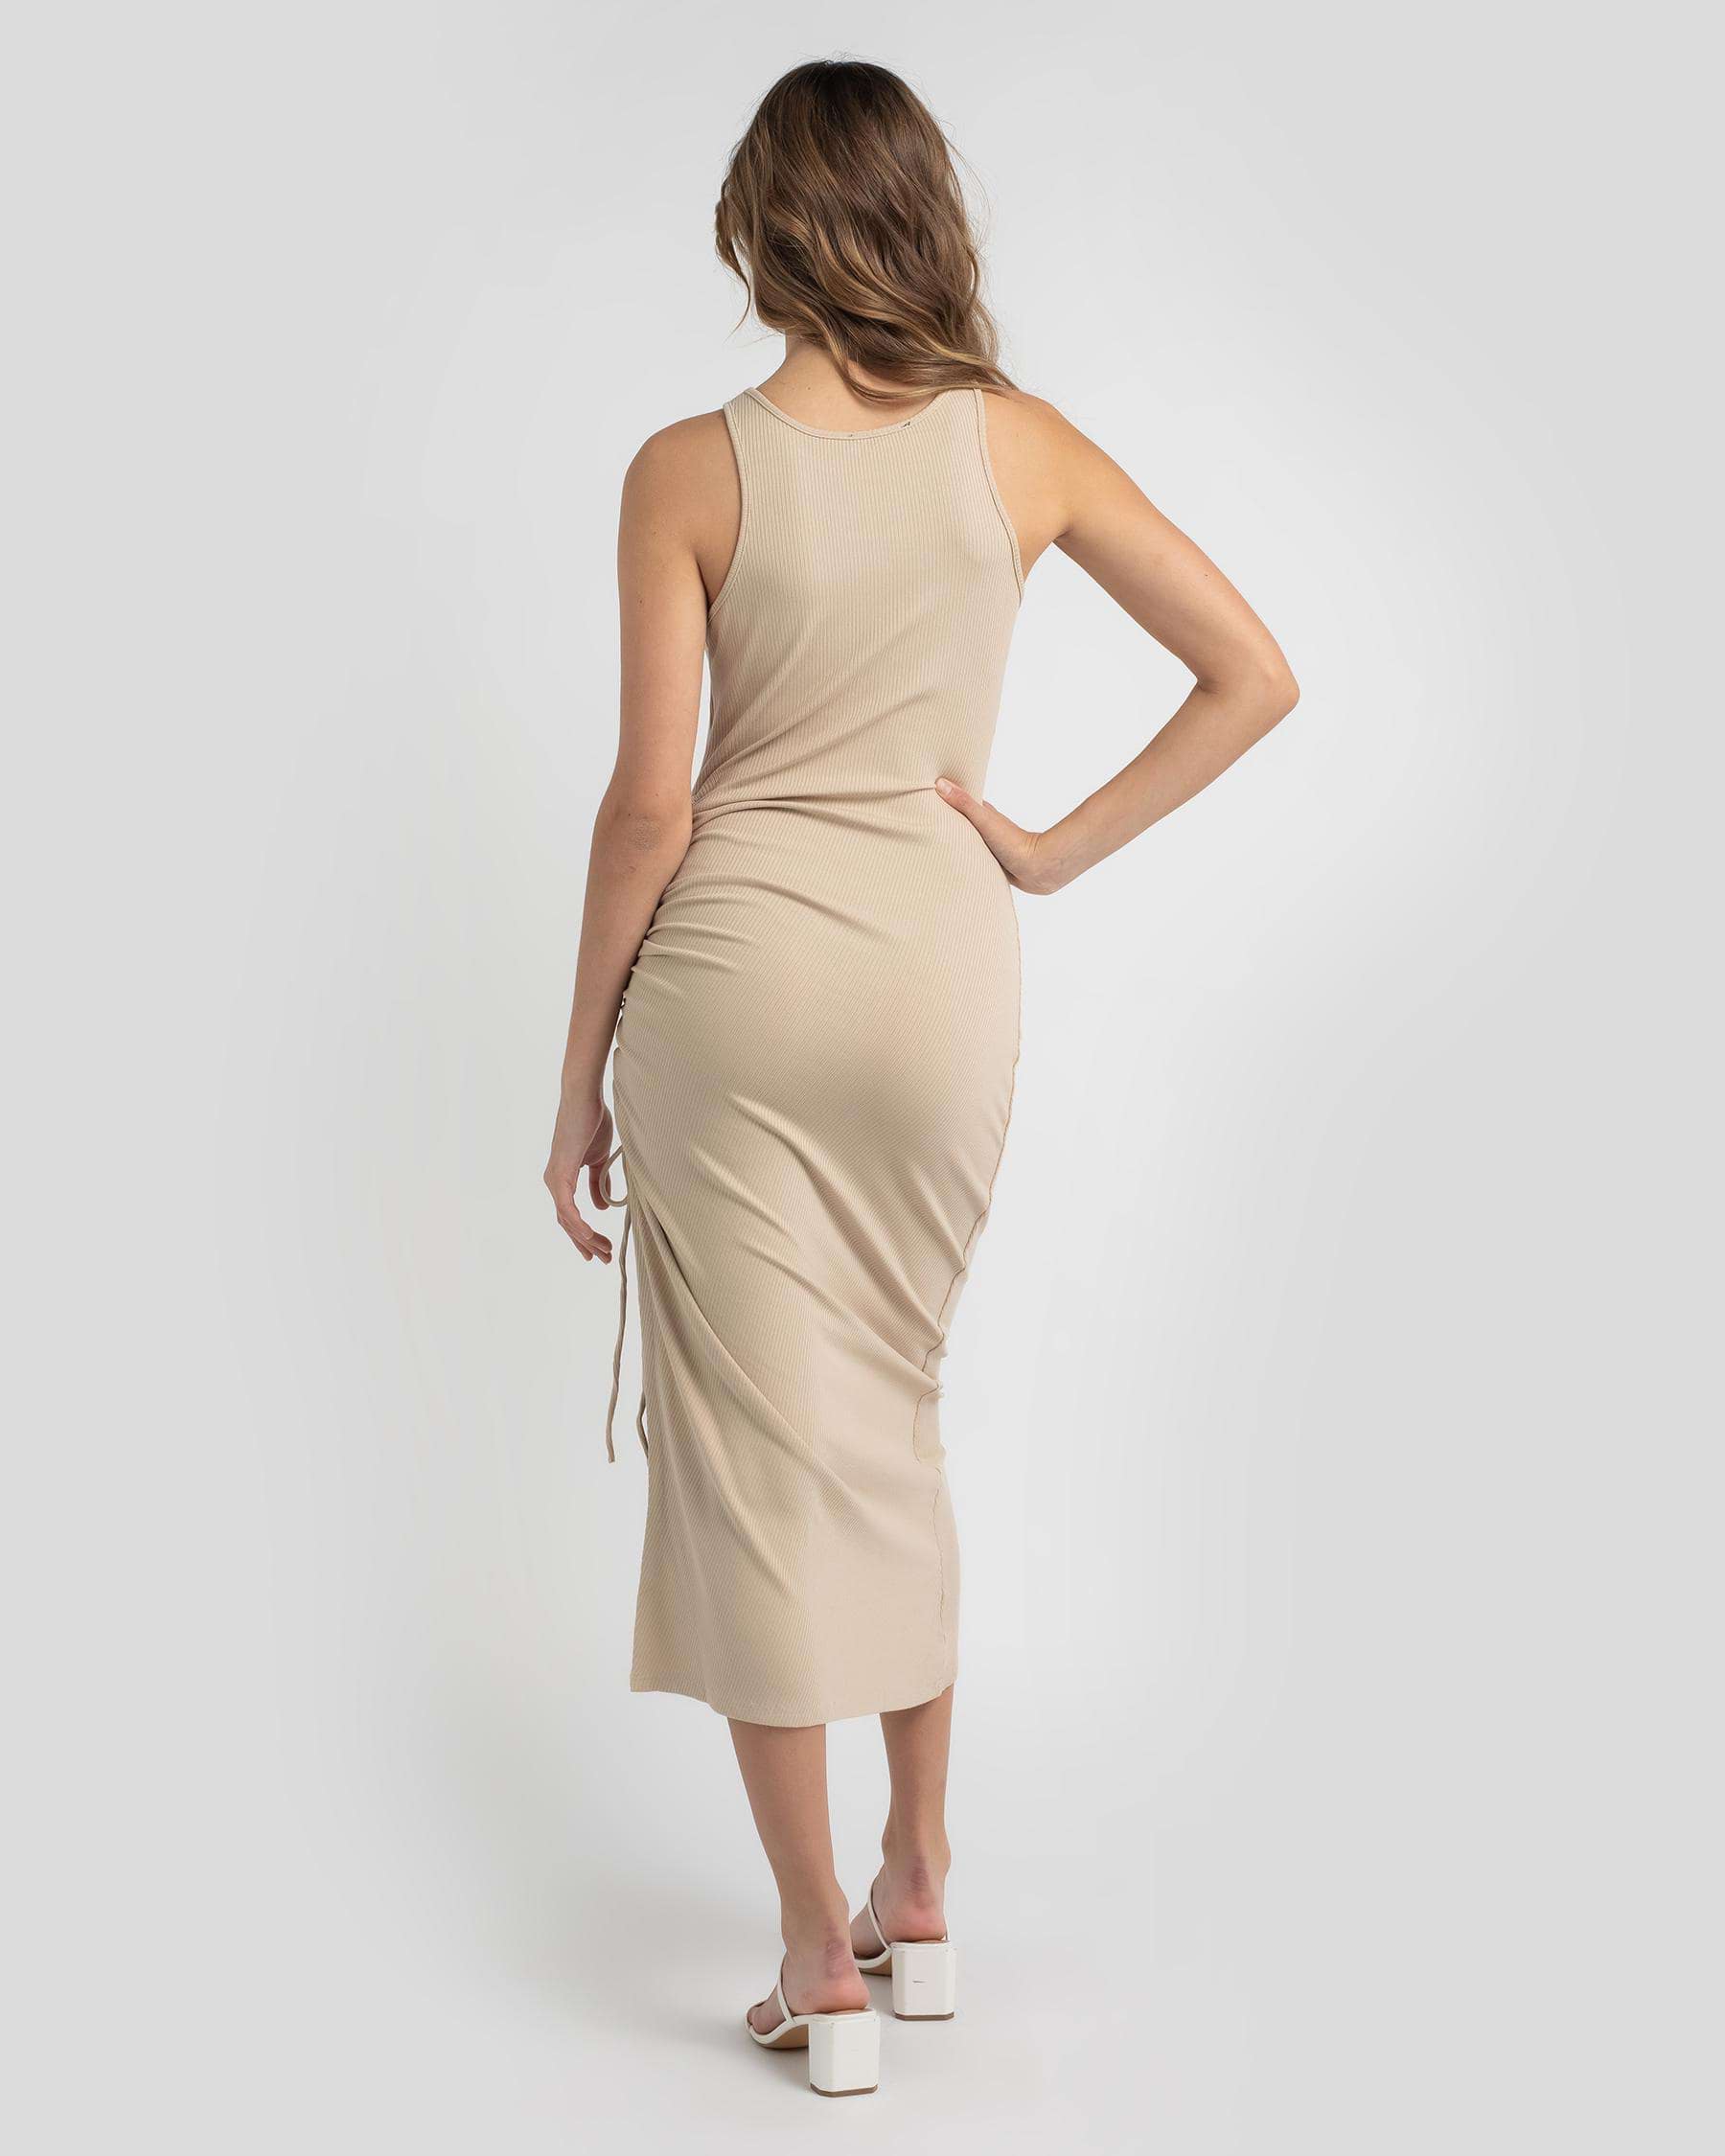 Shop Ava And Ever Ivy Midi Dress In Beige - Fast Shipping & Easy ...